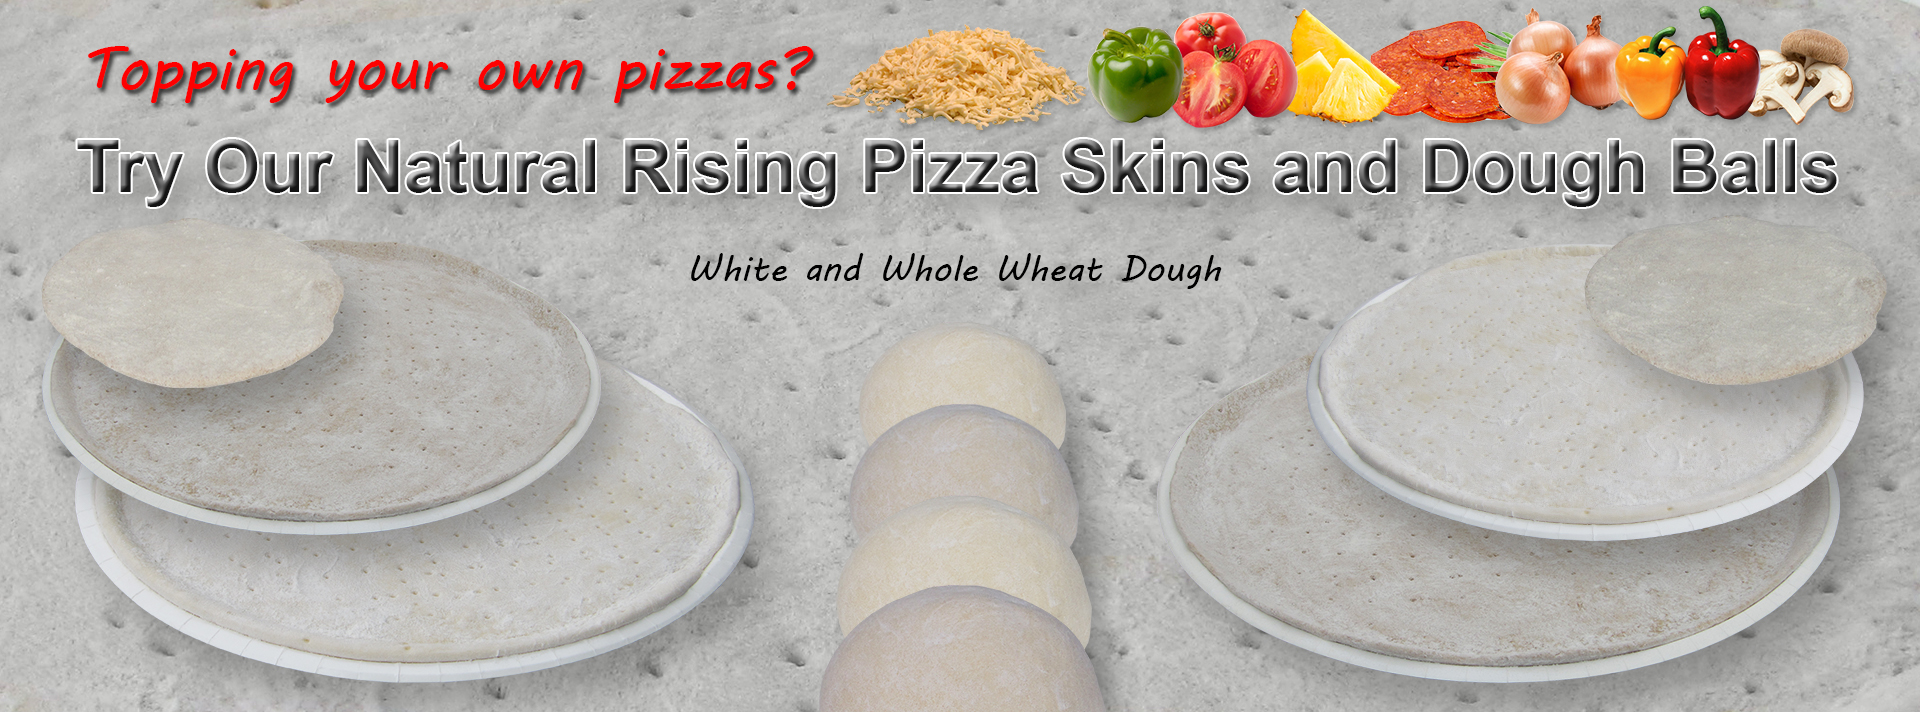 Topping your own pizza? Try our natural rising pizza skins and dough balls.